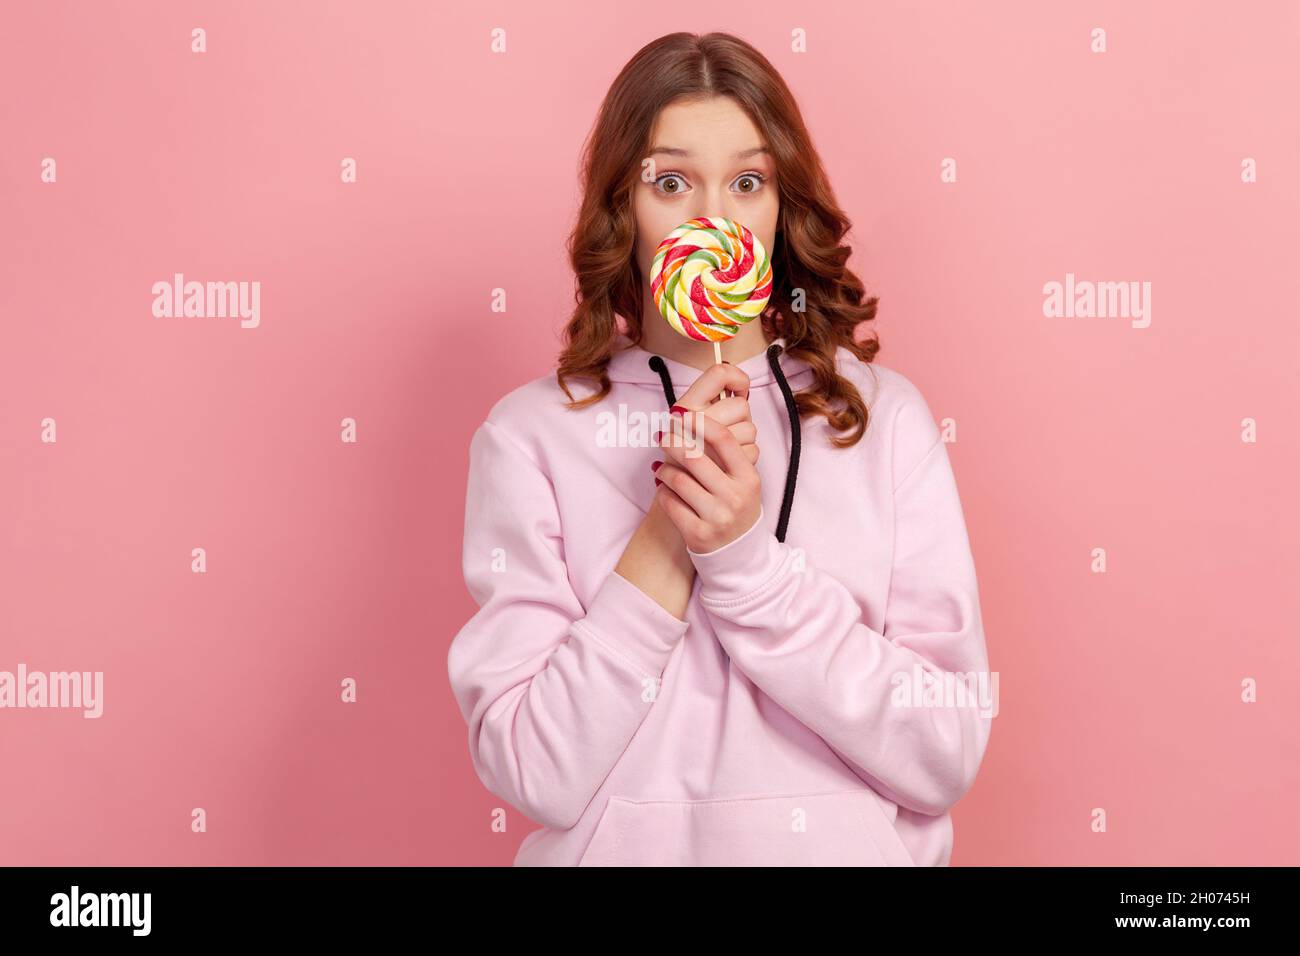 Portrait of surprised curly haired teenage girl in hoodie licking lollipop and looking at camera with amazed expression. Indoor studio shot isolated on pink background Stock Photo